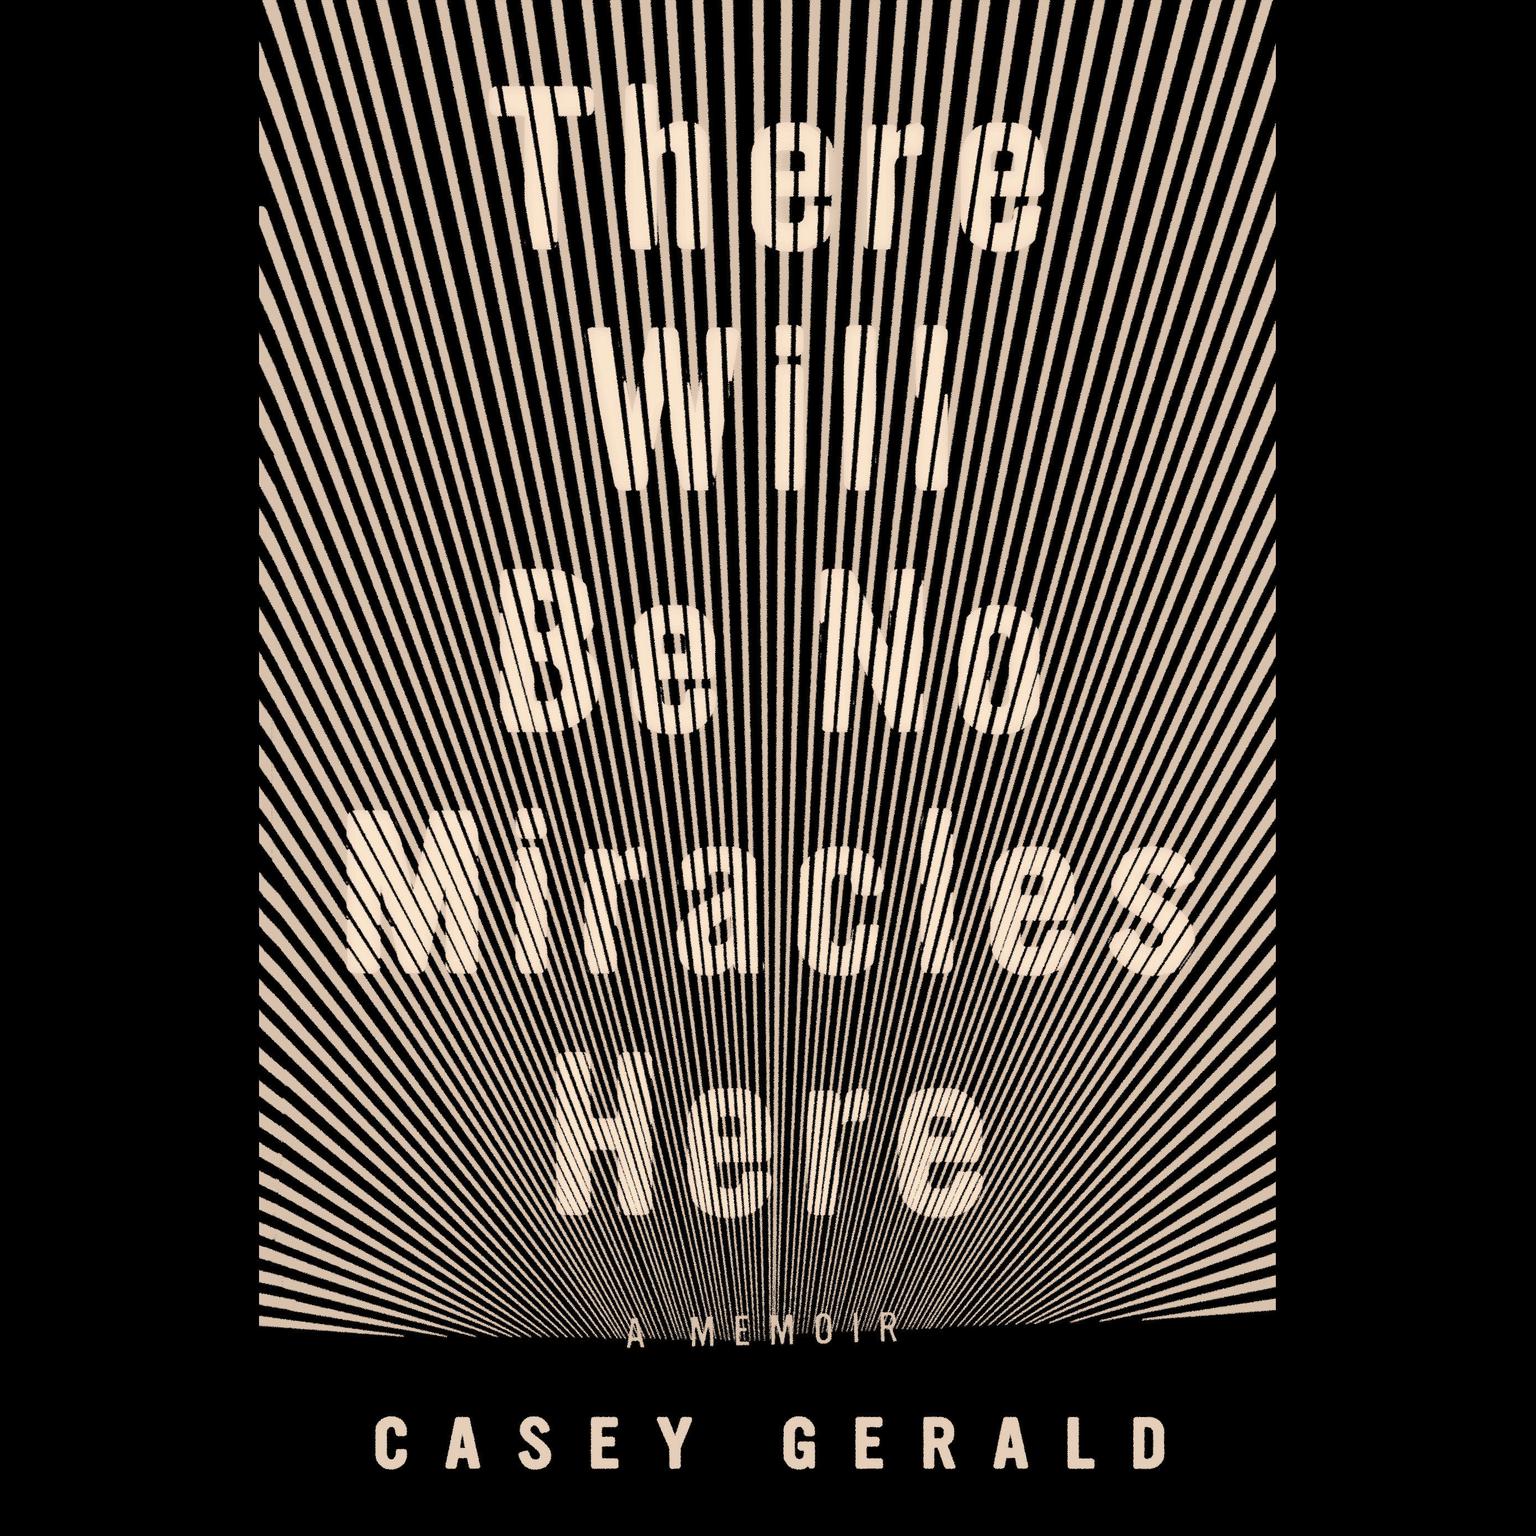 There Will Be No Miracles Here: A Memoir Audiobook, by Casey Gerald